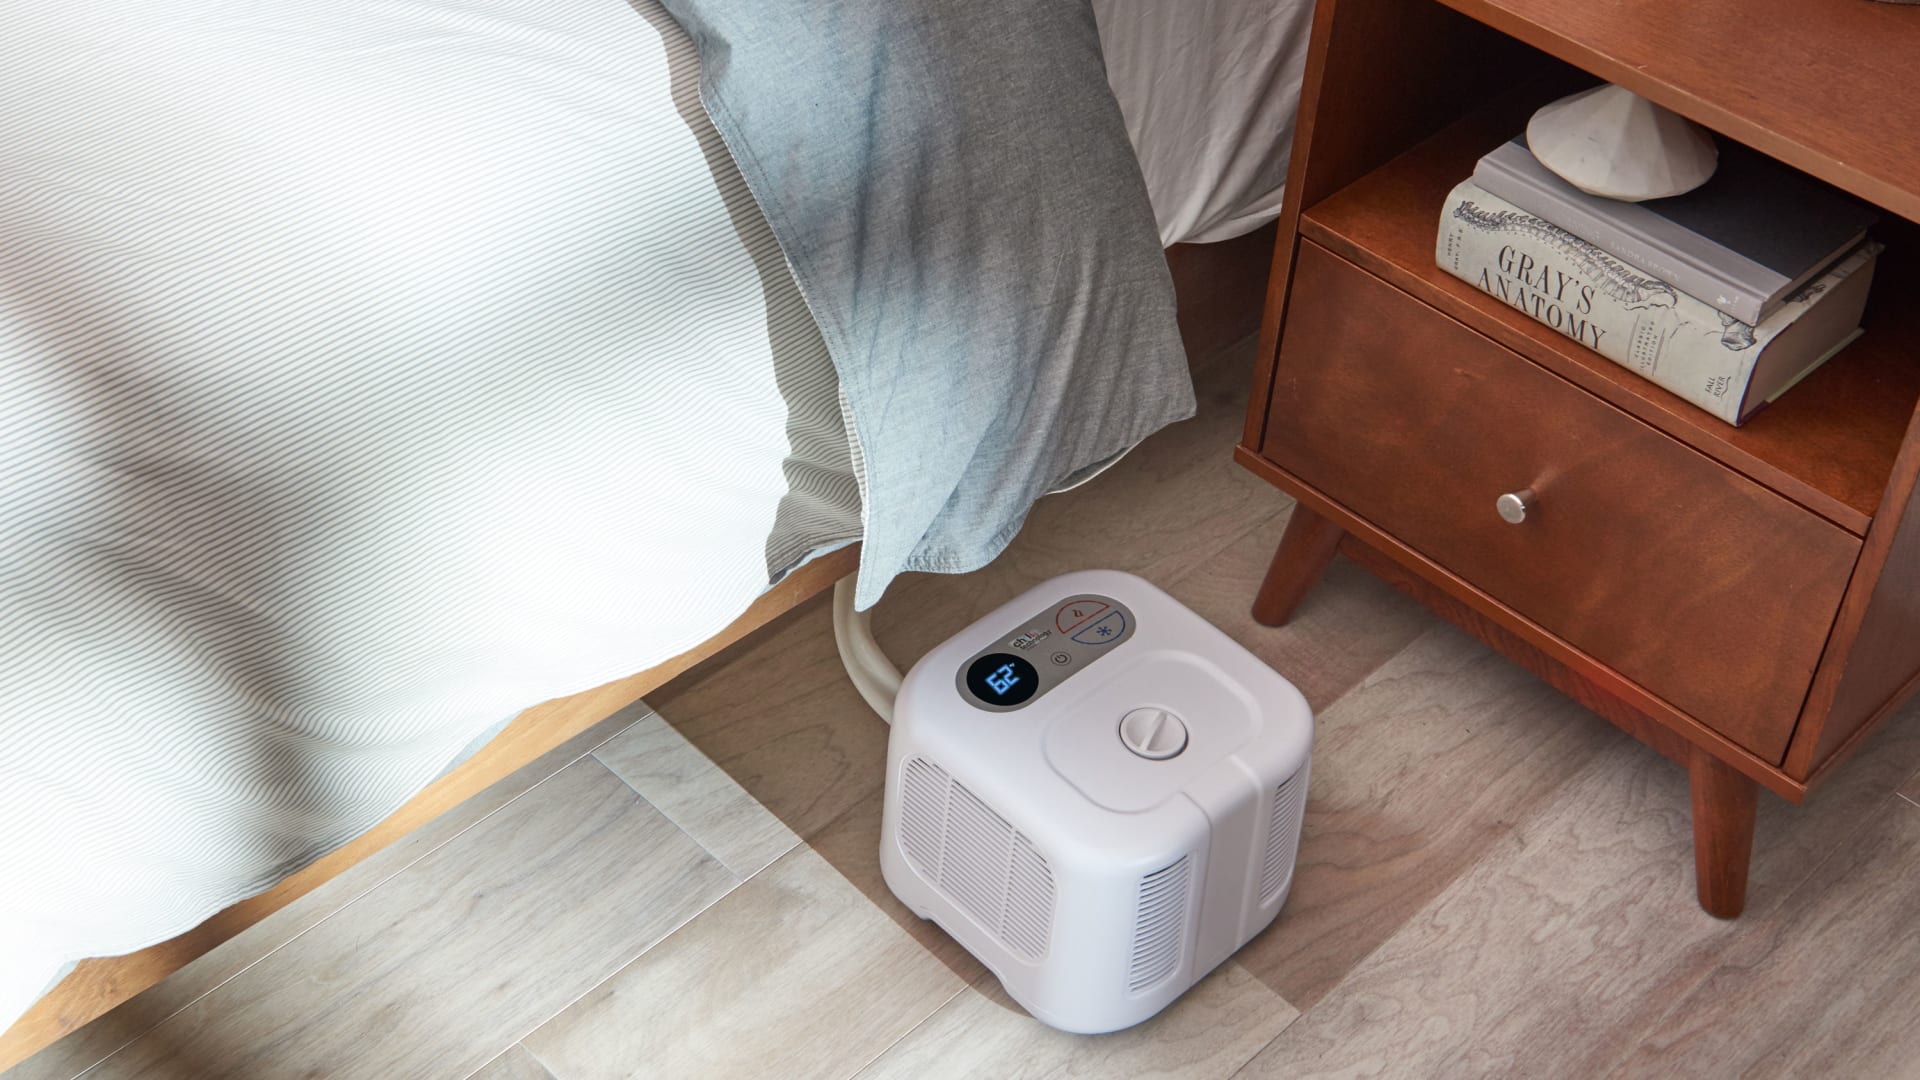 Sleepme keeps your bed at the ideal temperature and tracks your biometrics overnight.